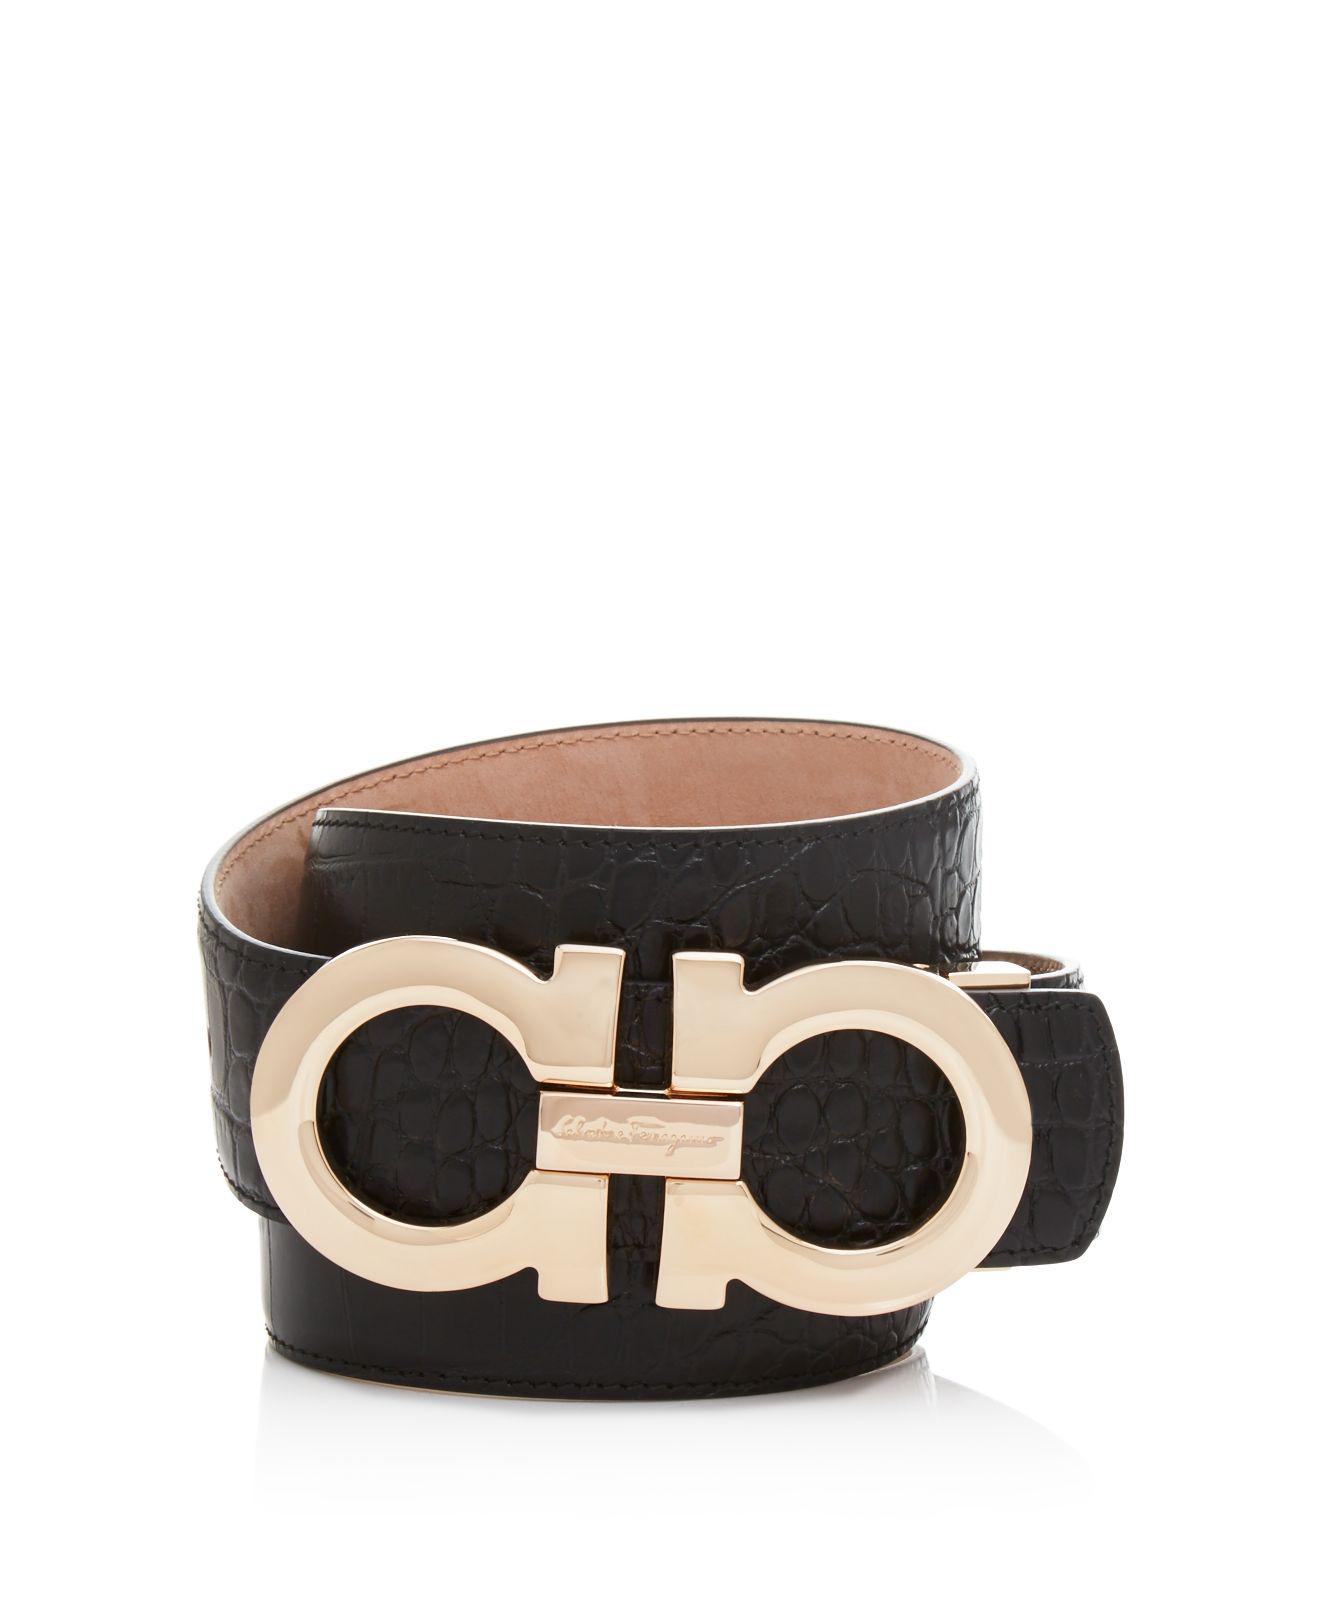 Lyst - Ferragamo Croc-embossed Calfskin Belt With Large Rose Gold Tone Double Gancini Buckle in ...